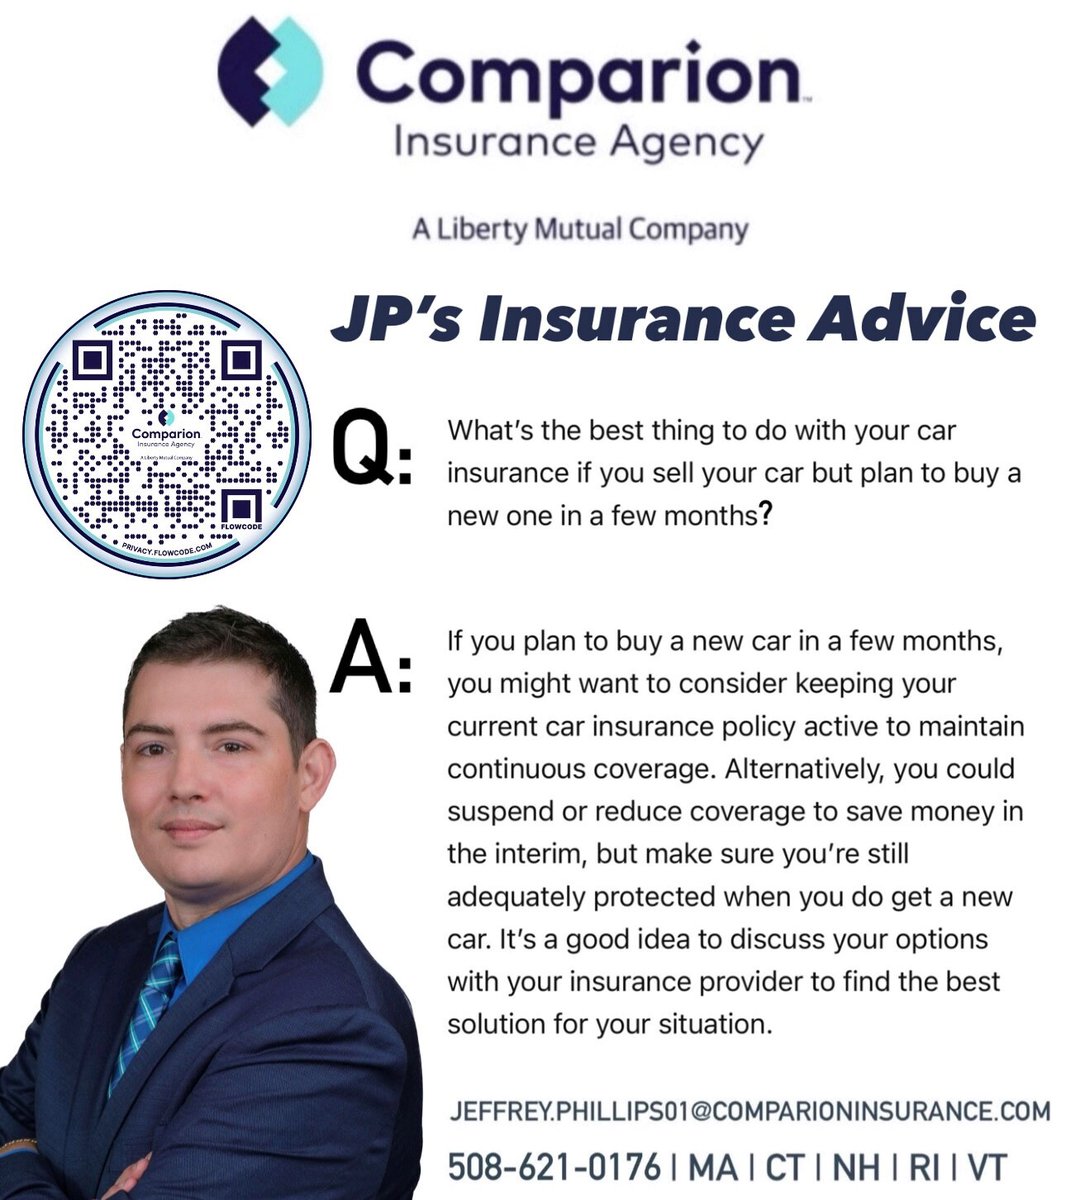 JP's Insurance Advice I am always here for you when you need me 📲 508-621-0176 📧 jeffrey.phillips01@comparioninsurance.com 💻 bit.ly/3xVlPdM #herewhenyouneedme #localagent #comparioninsurance #trust #inyourcorner #hereforyou